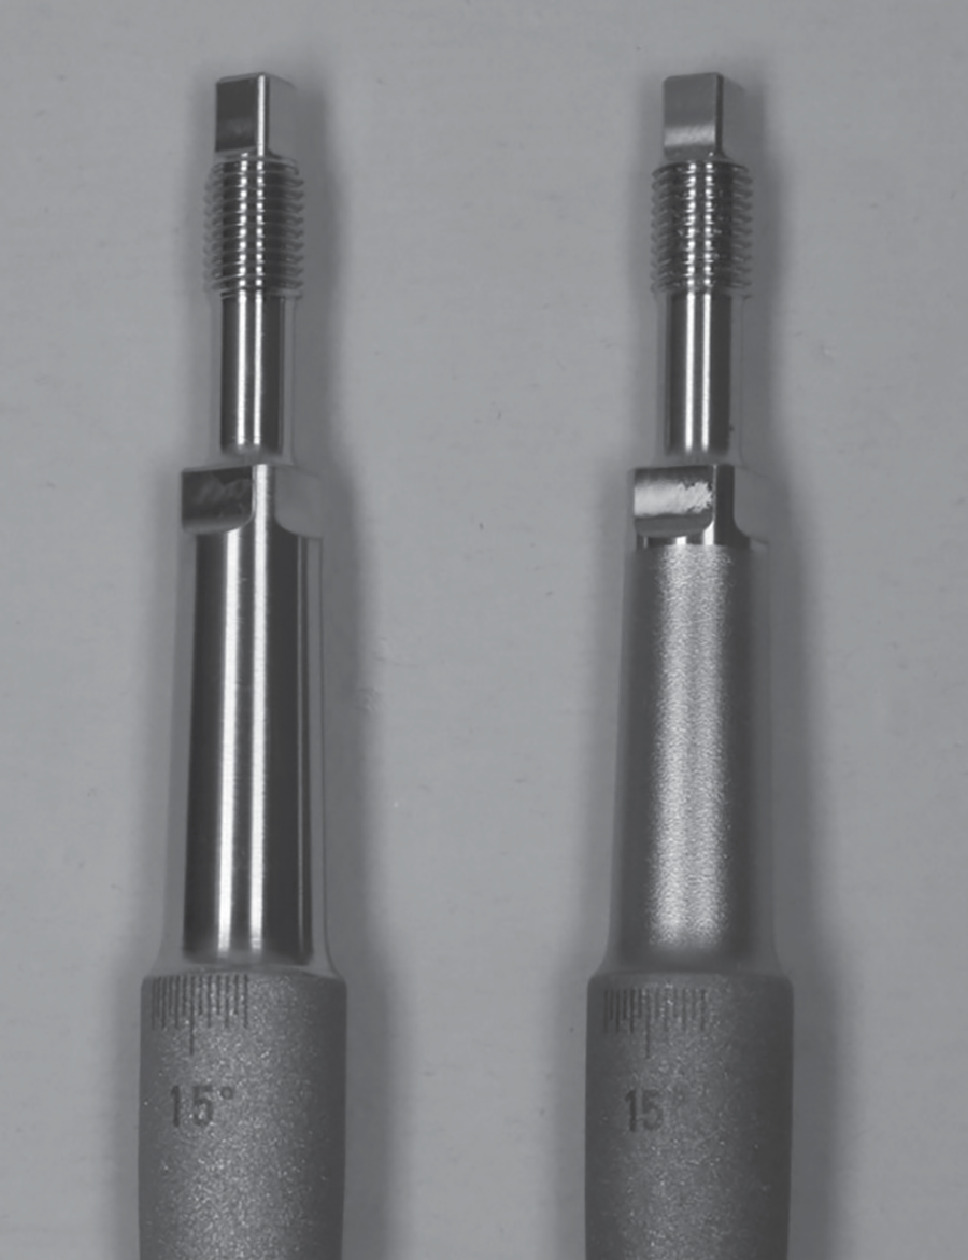 Fig. 2 
          Comparison of the original (left) and current (right) design of the modular taper of the distal implant. After the shot-blasting process for surface hardening, the polished taper has a matte surface. Via the thread, the tension nut can apply tensional forces on the modular connection.
        